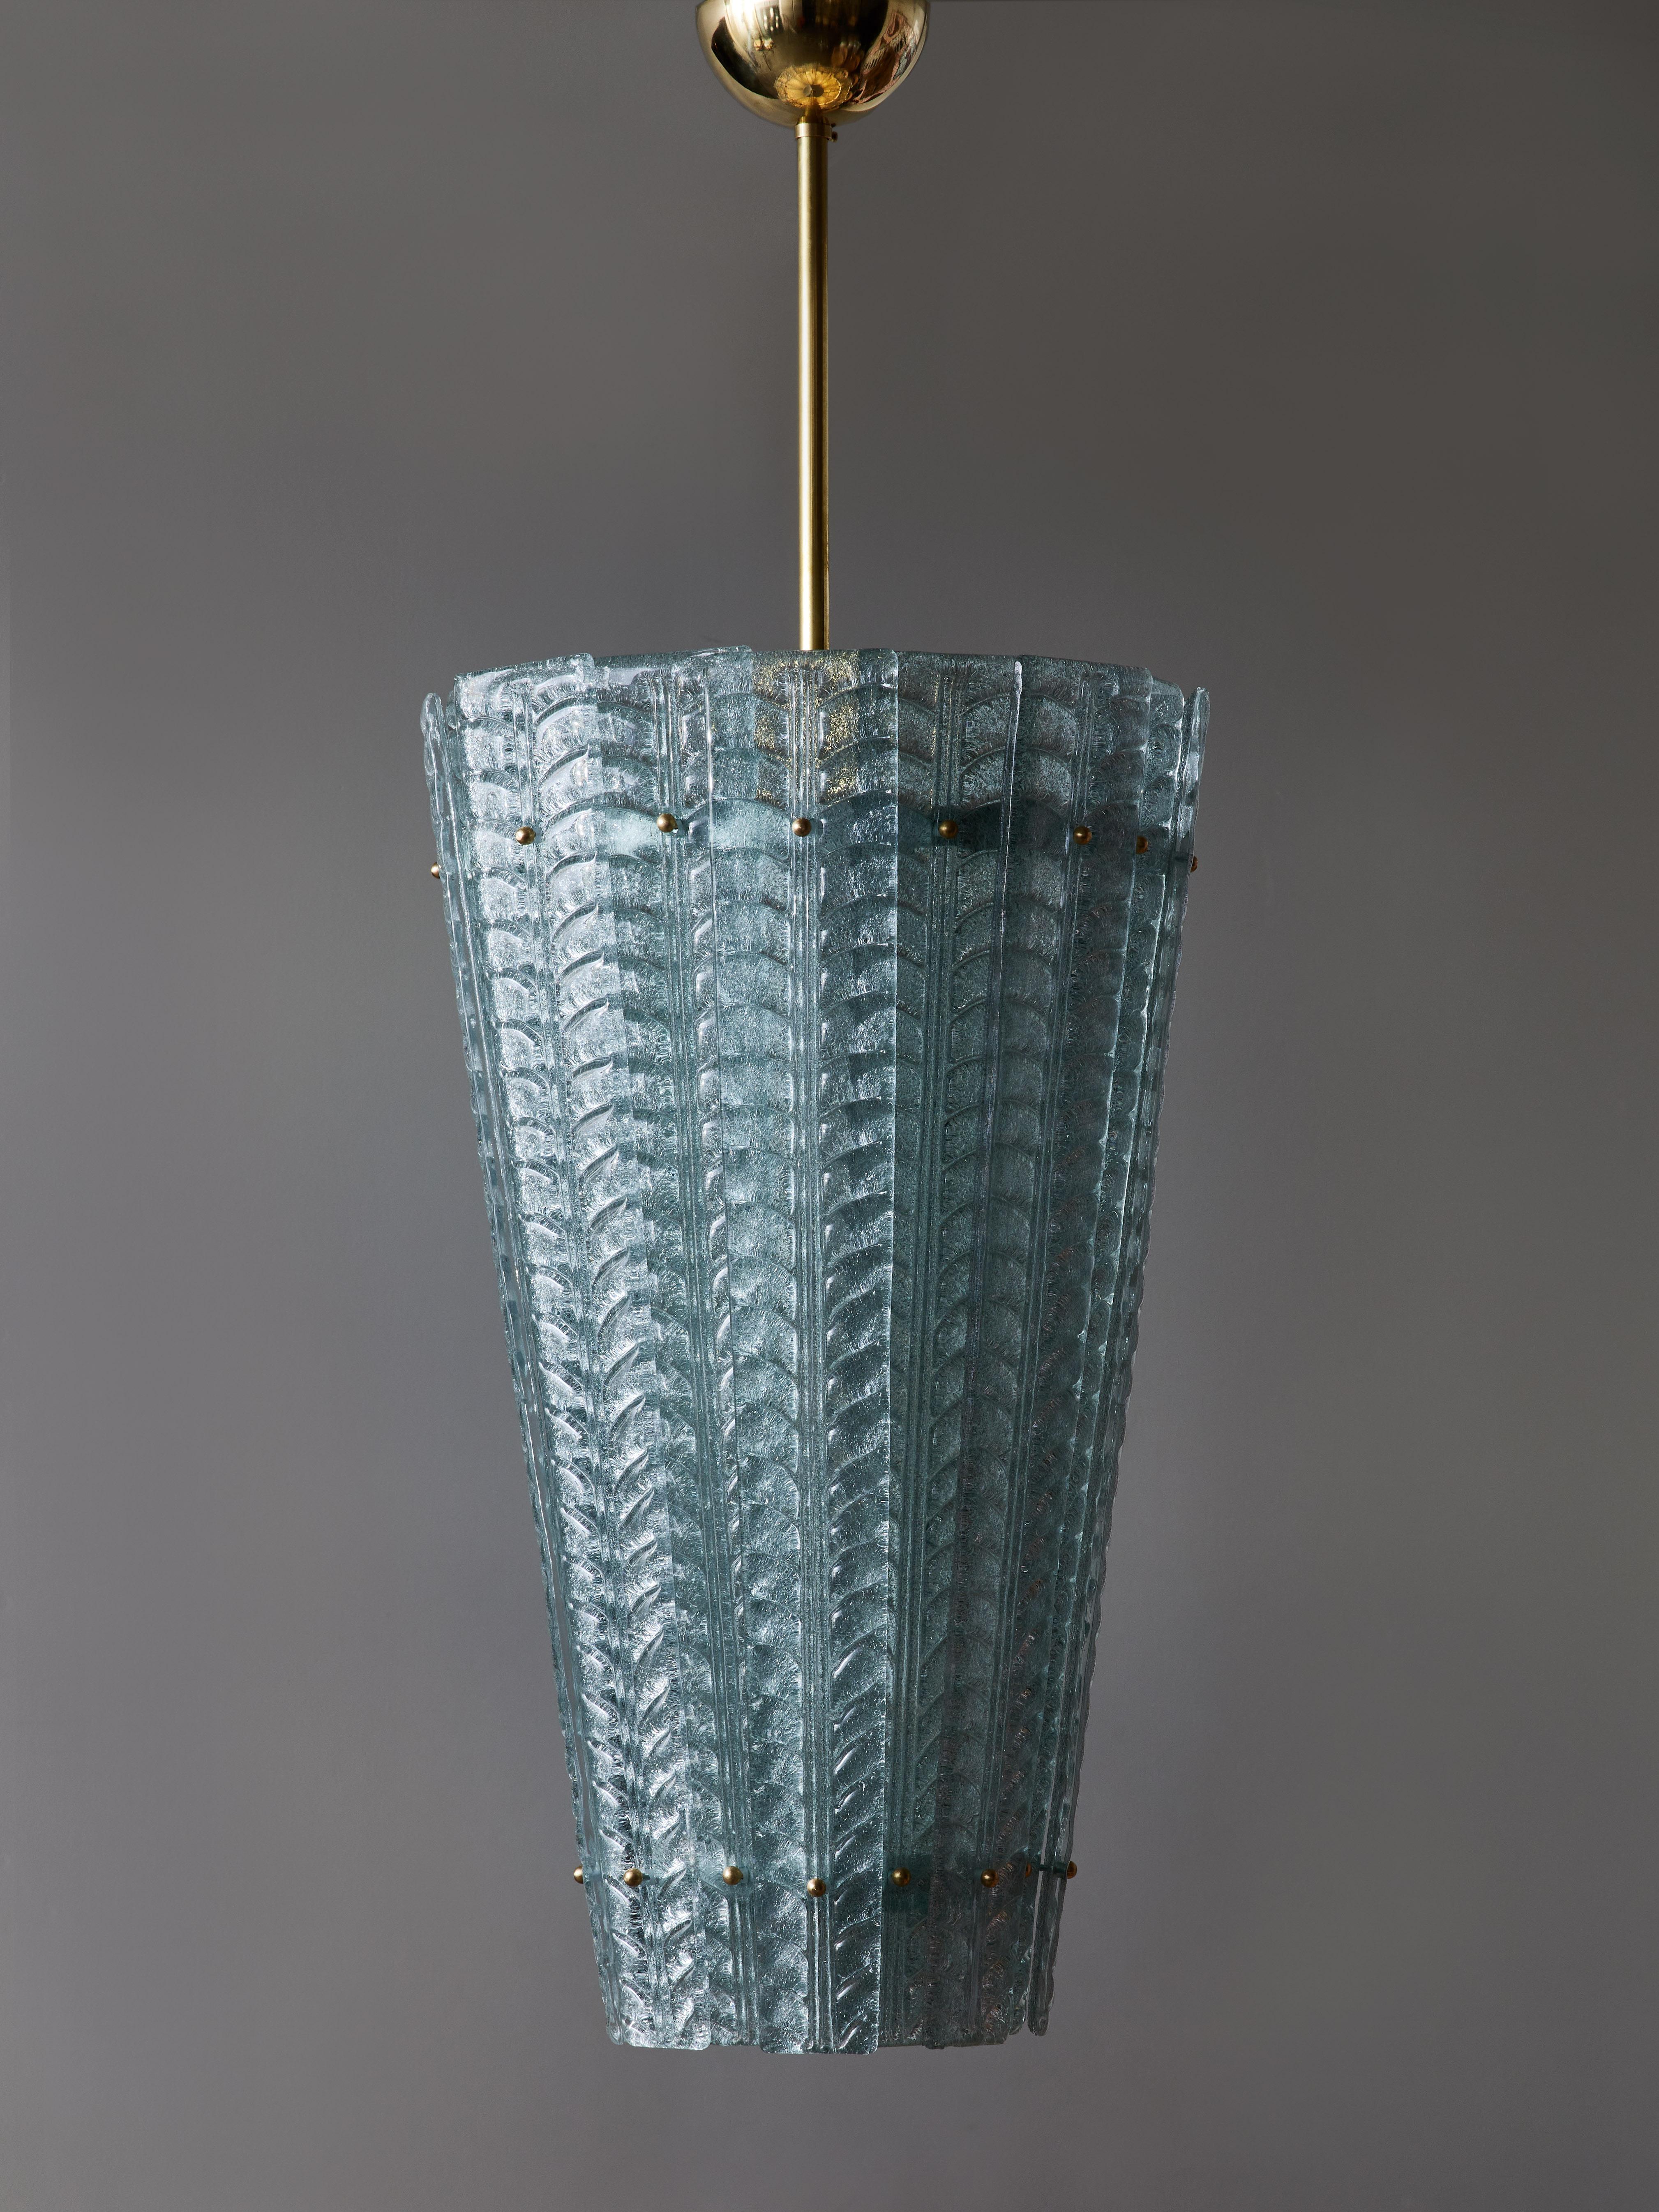 Lantern made of a brass structure and central stem covered by Murano glass slabs overlapping each other. Each glass part is embossed with leaves motifs and the whole slab is made of clear teal blue.